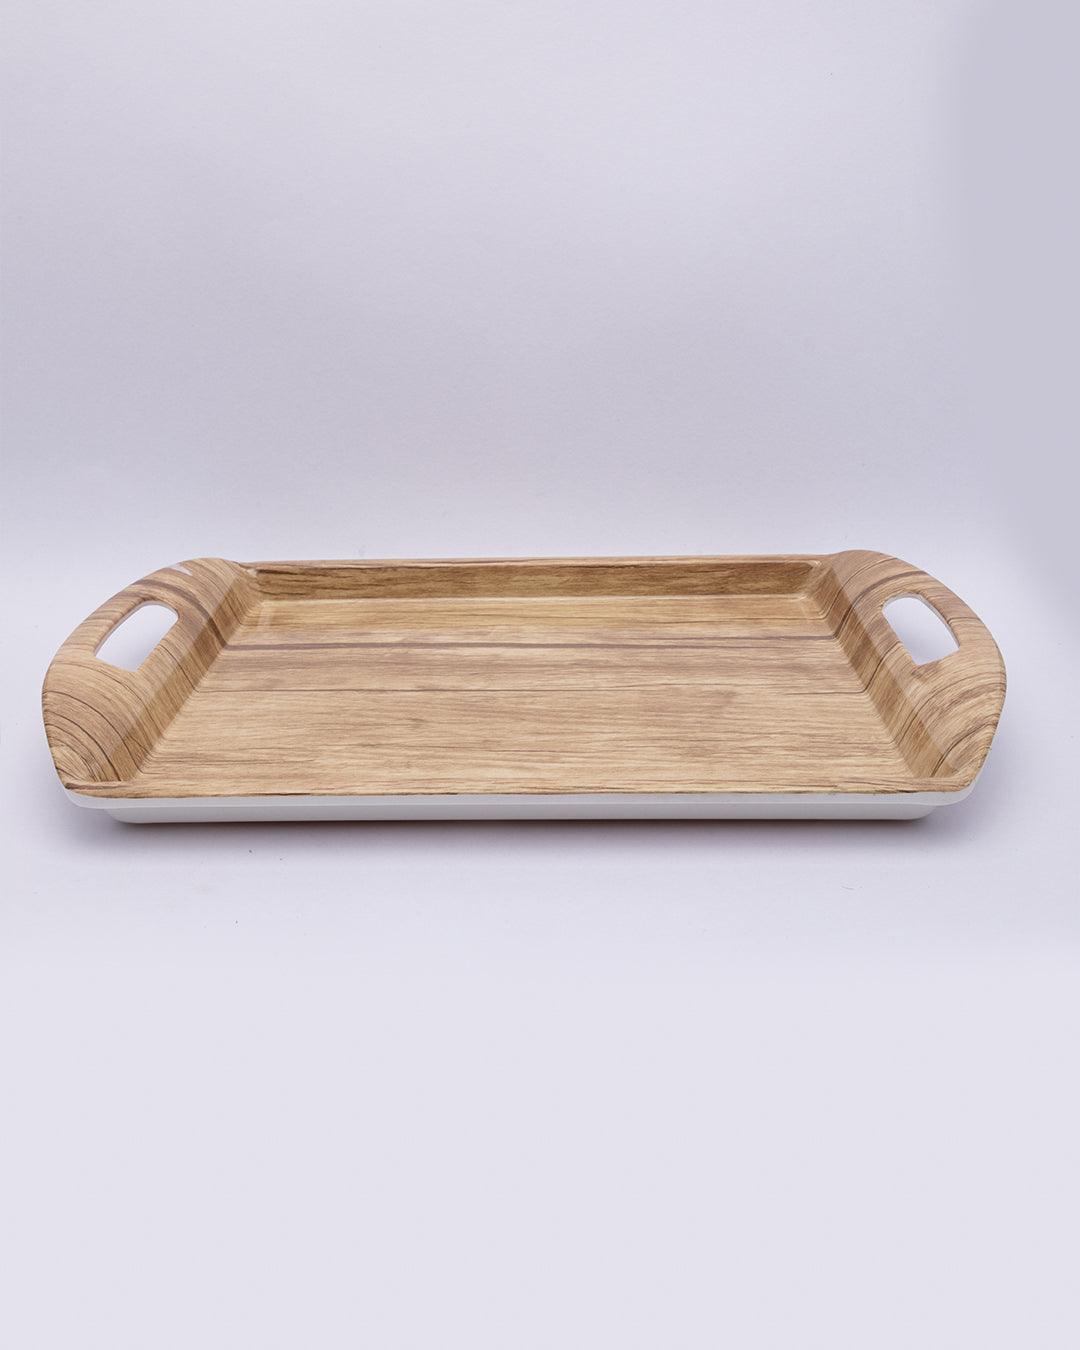 Serving Tray Set, with Wooden Finish, (Small, Medium, & Large), Brown Colour, Melamine, Set of 3 - MARKET 99